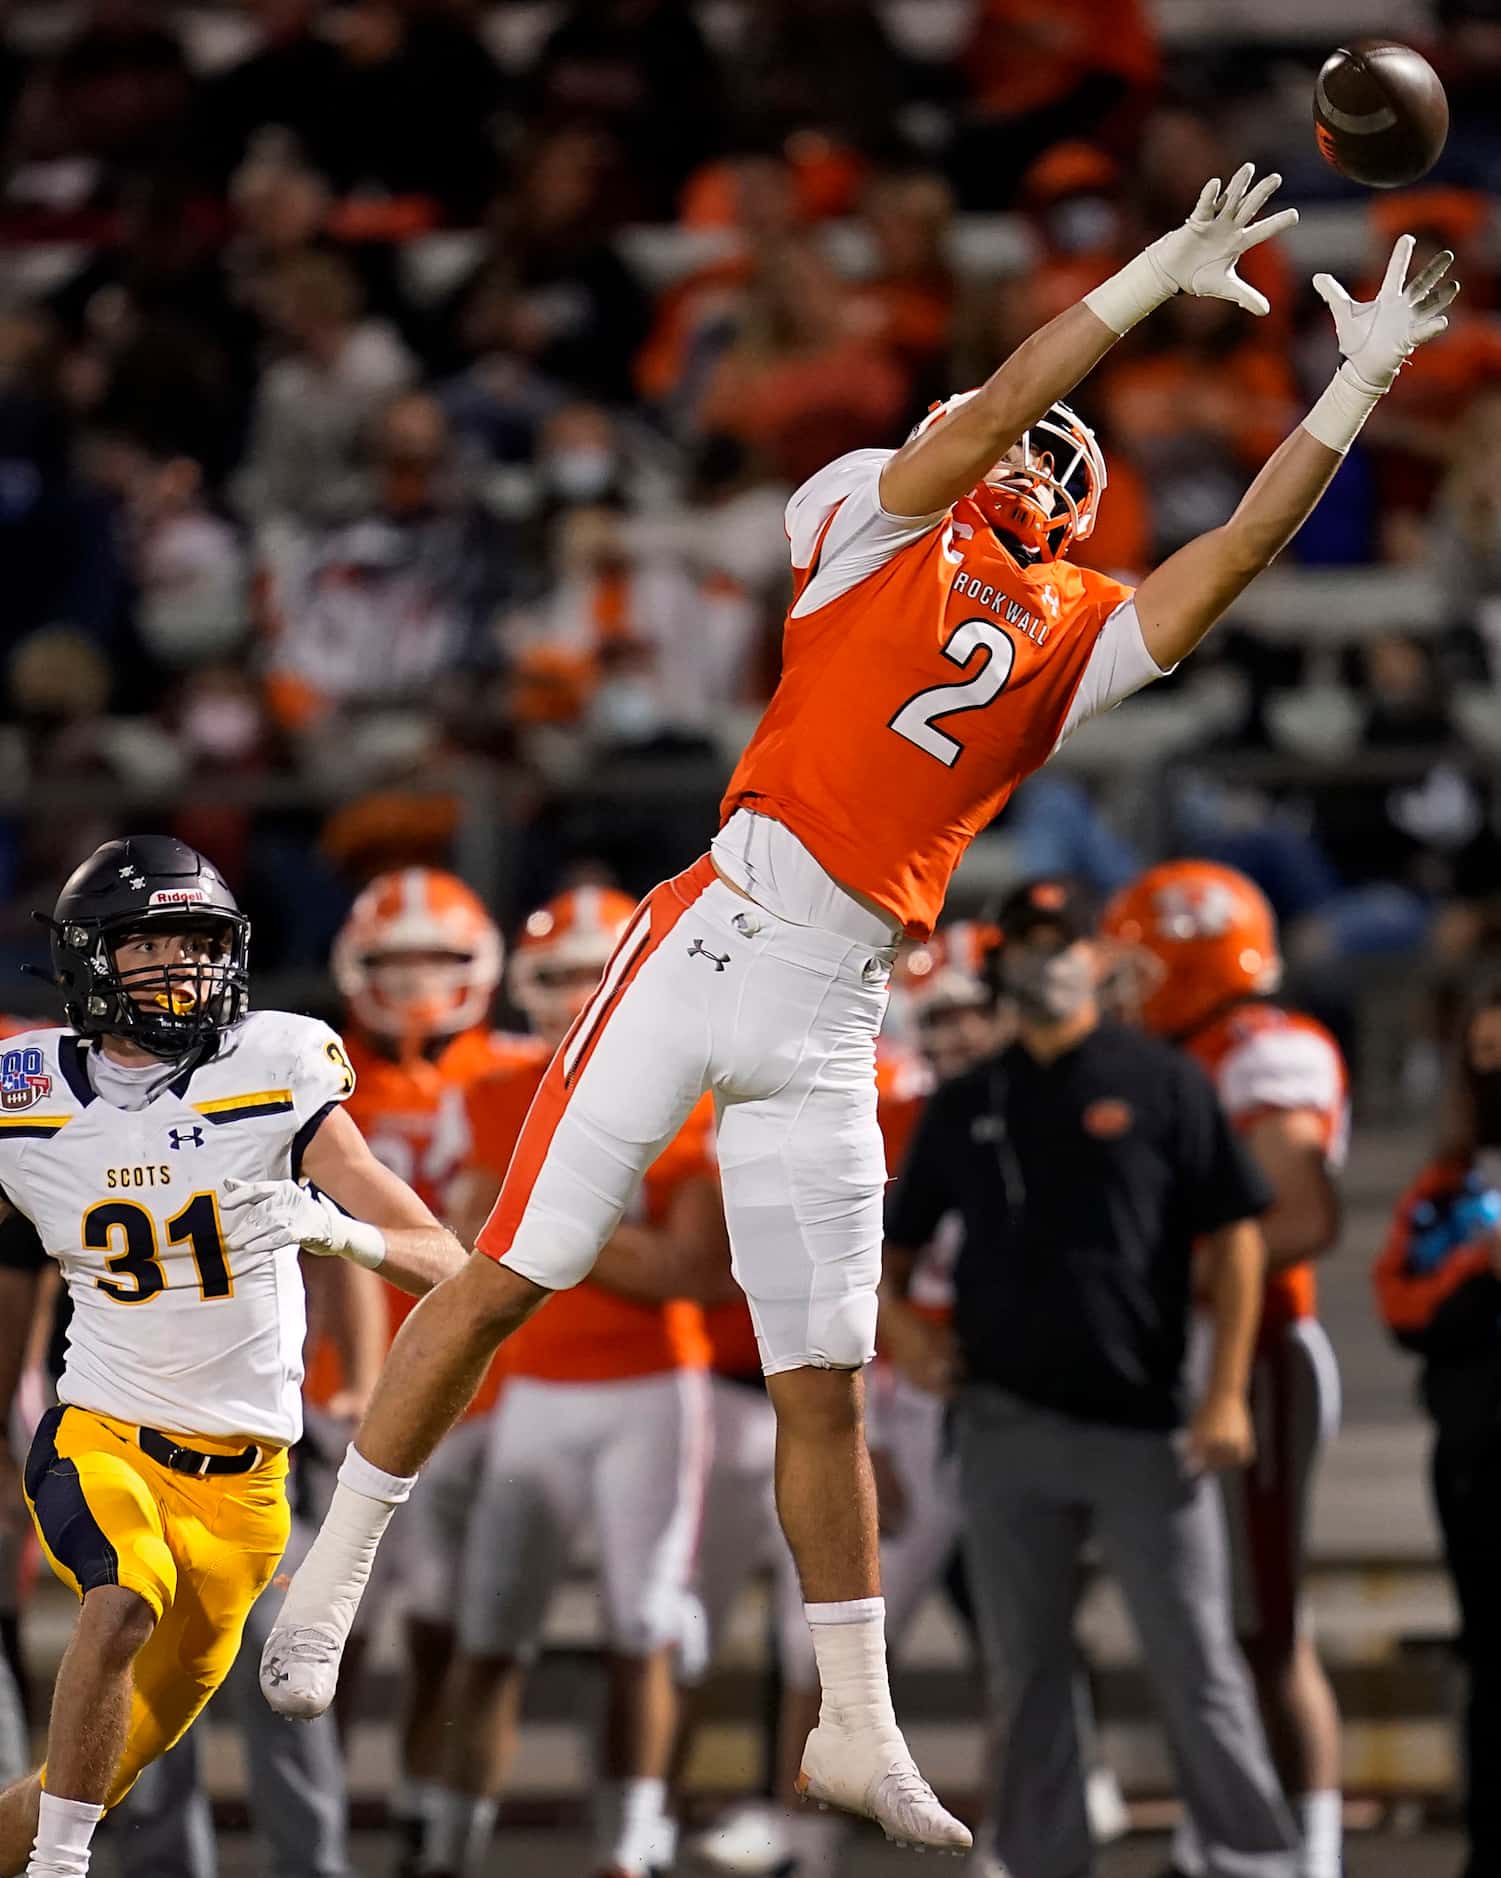 Rockwall wide receiver Brenden Bayes (2) can’t make a catch during the first half of a high...